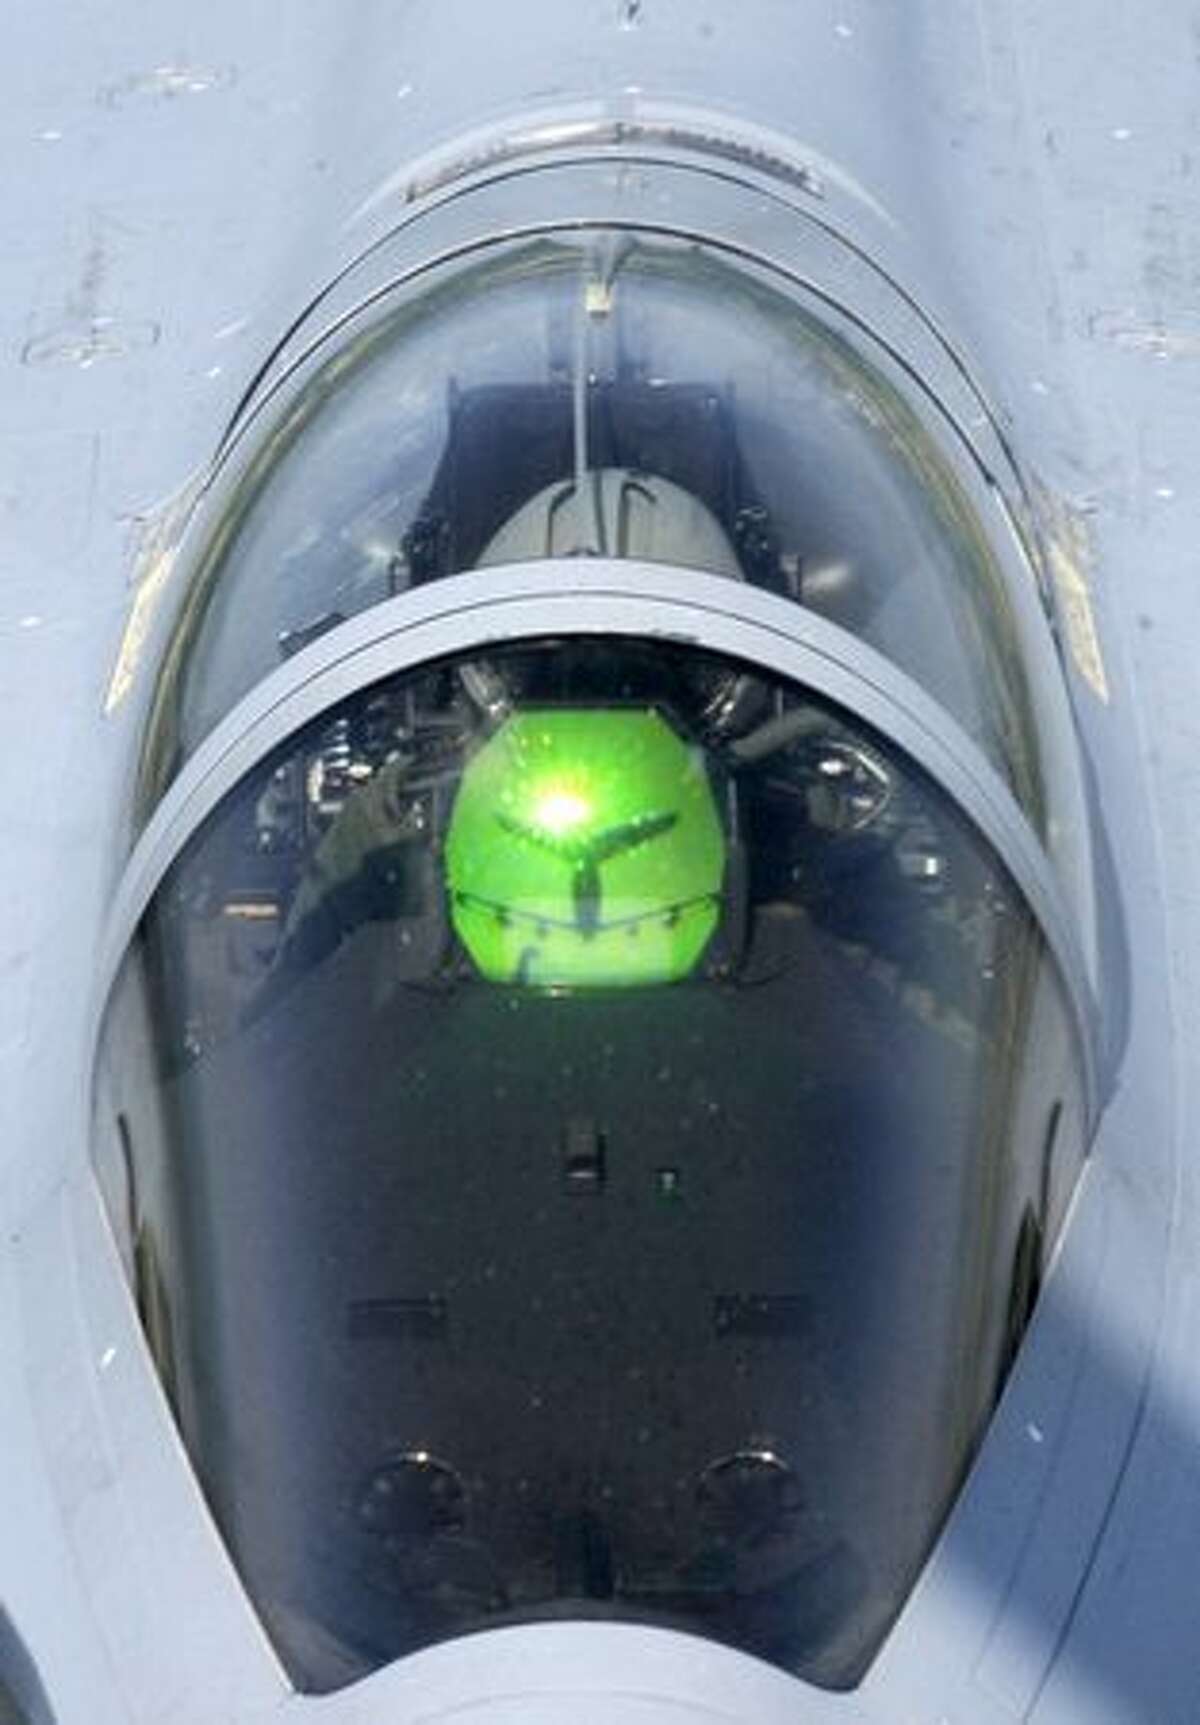 A Boeing C-135 stratolifter is reflected on the heads-up display in a Rafale fighter jet on a training flight over Chateaudun, France ahead of the July 14 Bastille Day military air parade in Paris.